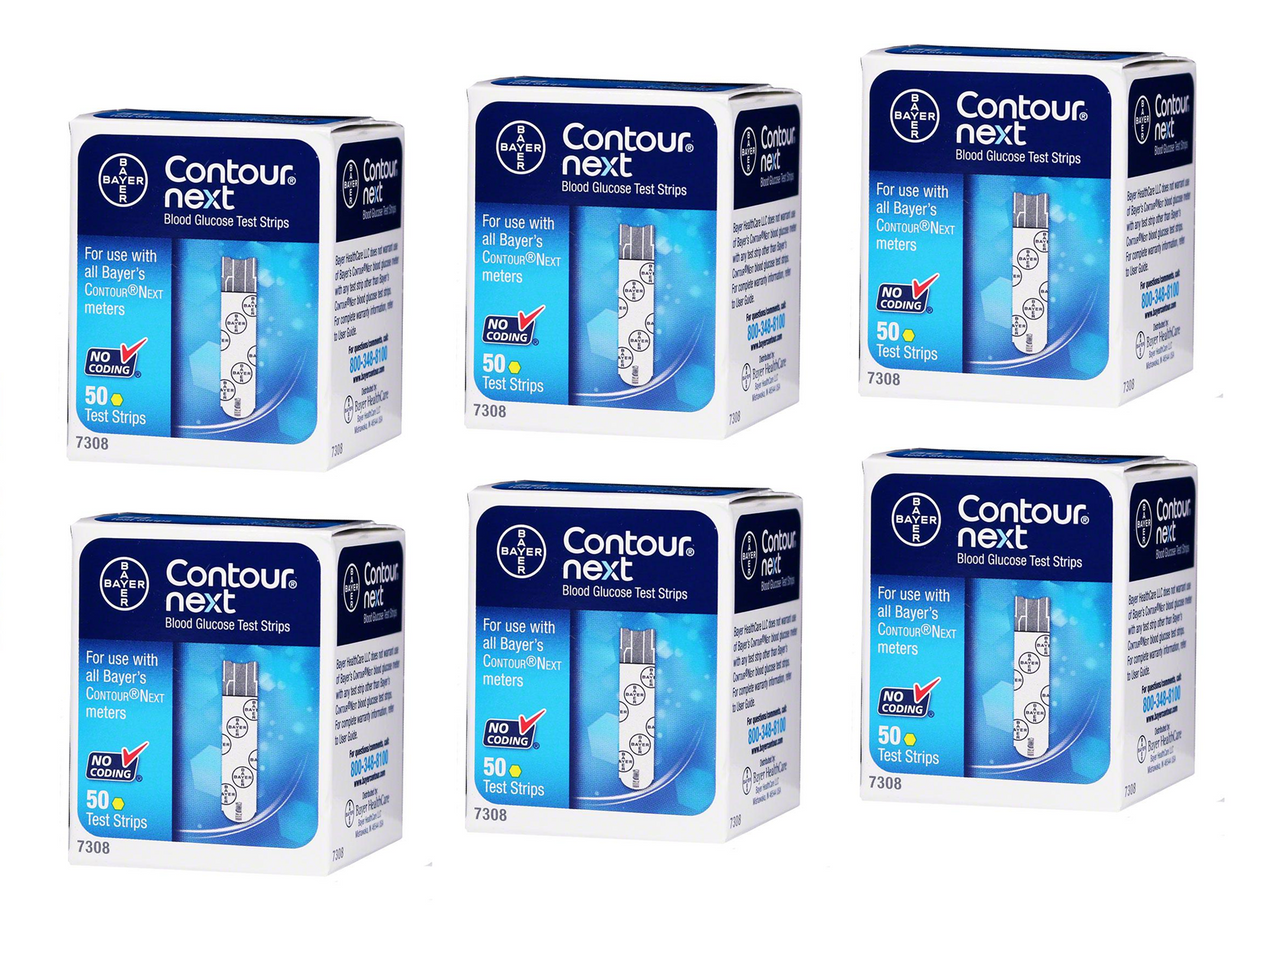 Bayer Contour Next Test Strips 50 6-pack 300 Strips